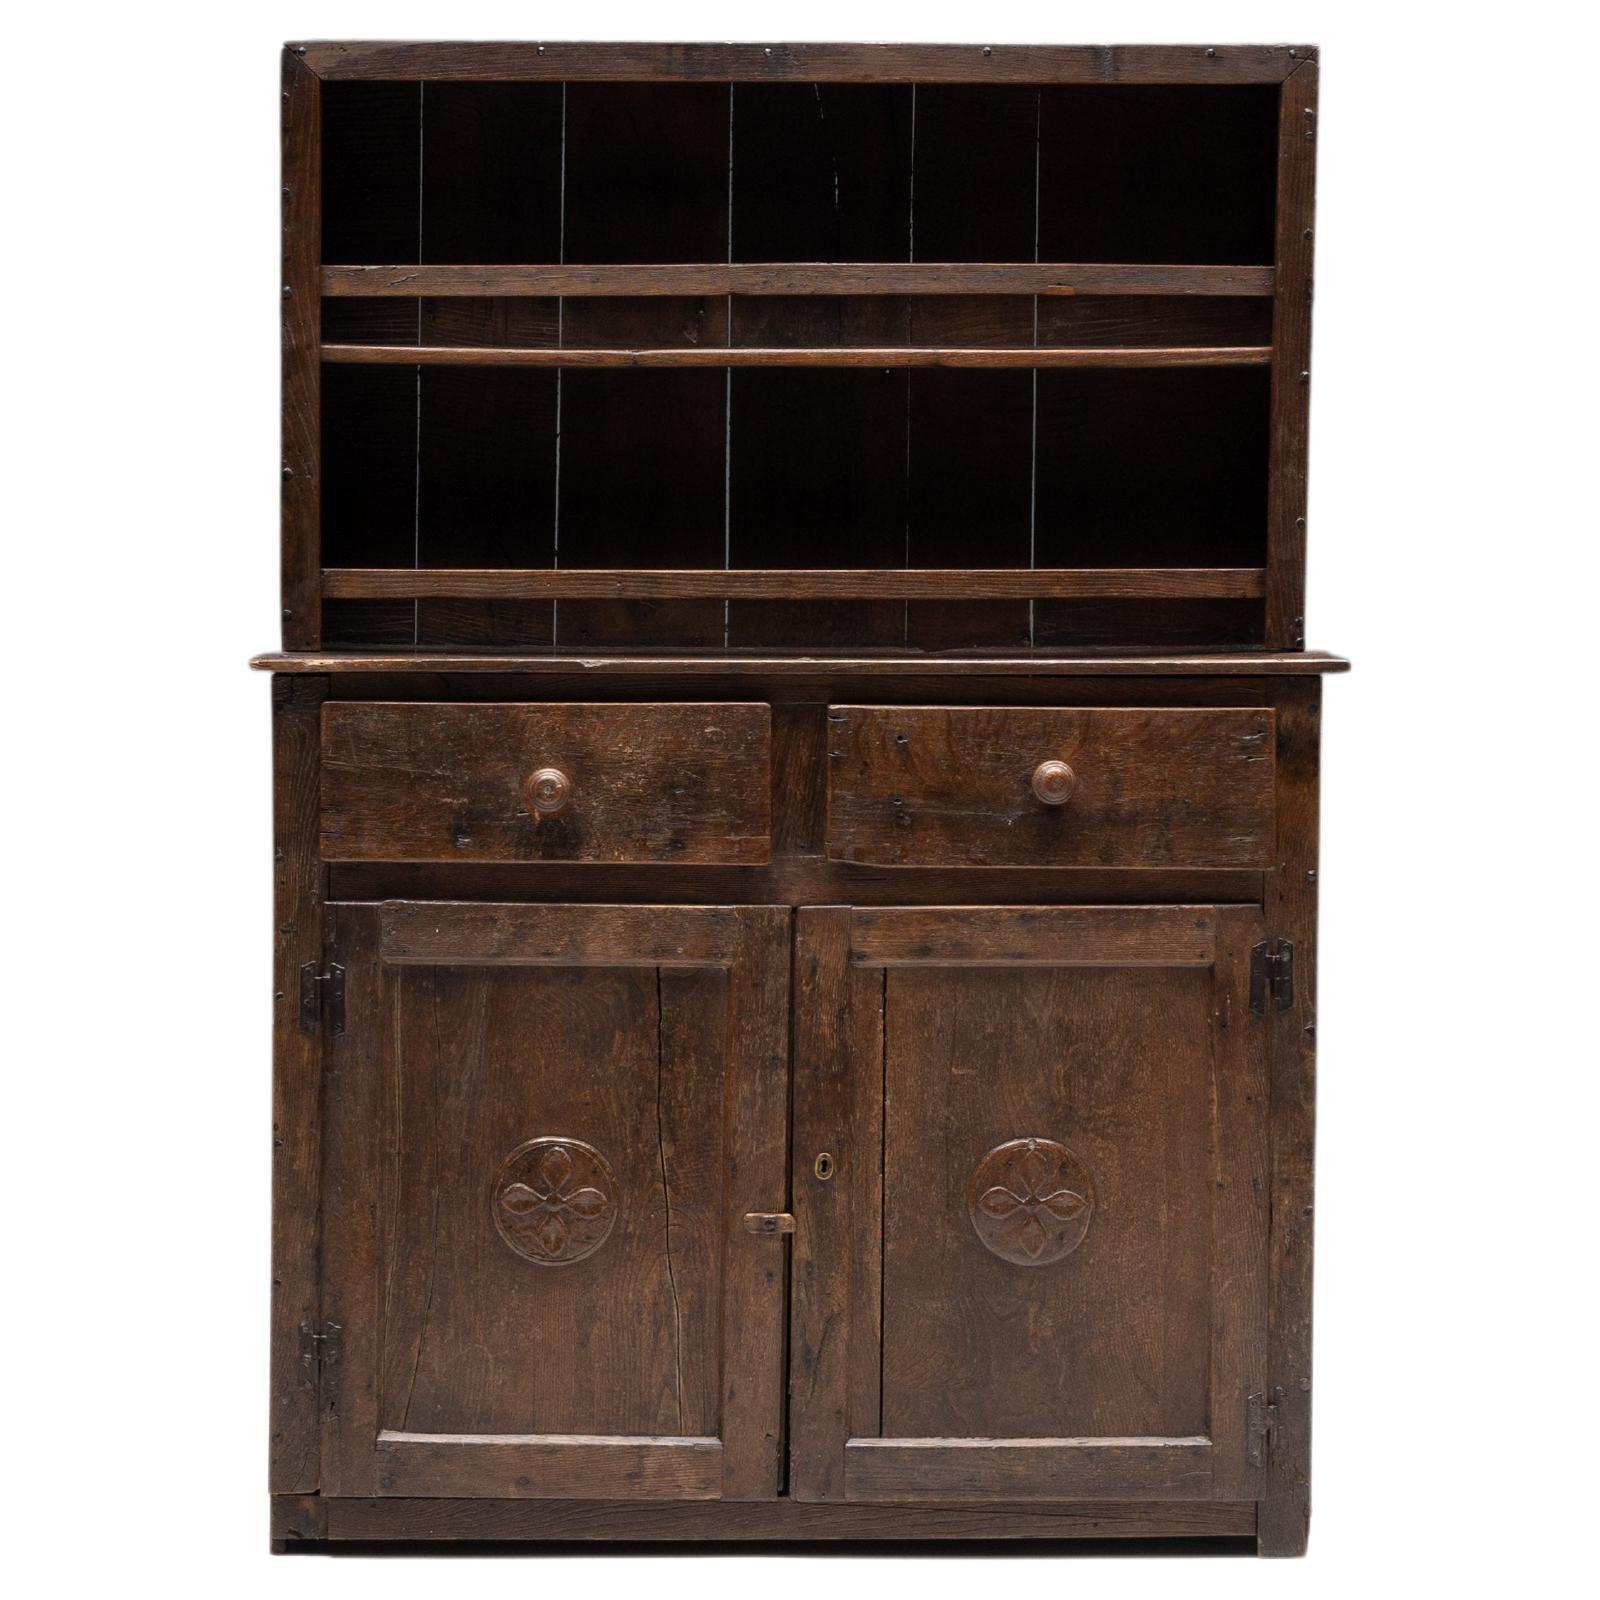 Rustic Travail Populaire Cupboard, France, Early 19th Century For Sale